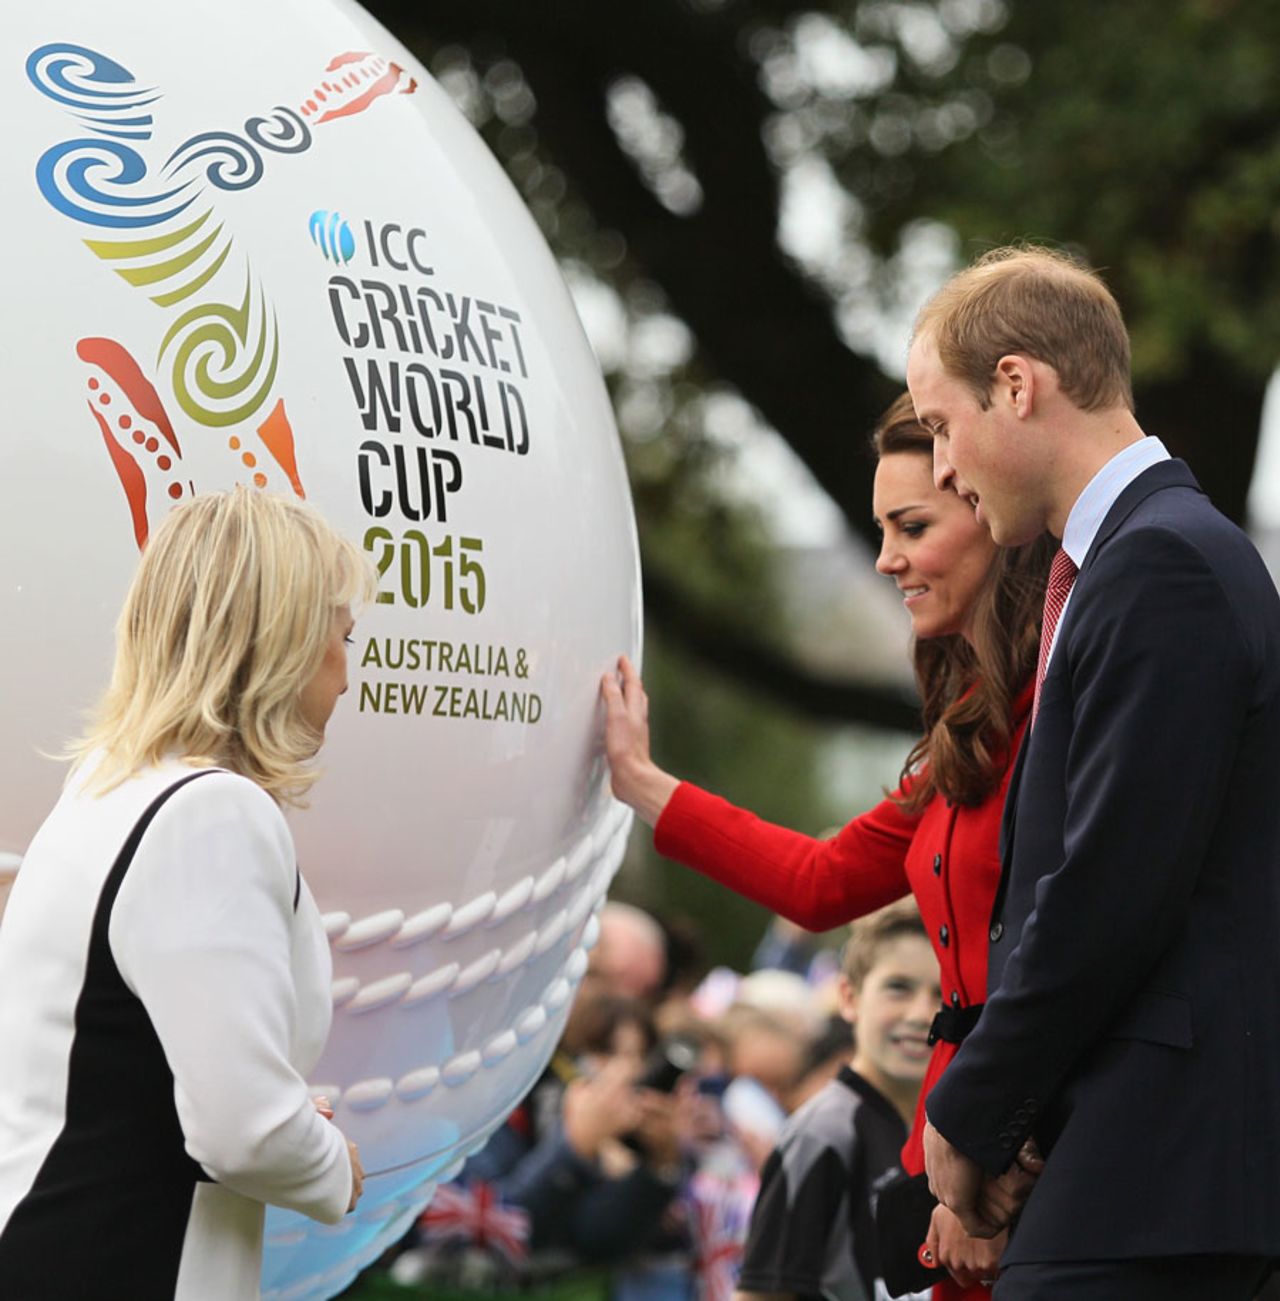 Prince William and Kate Middleton admire a replica cricket ball in Christchurch, during the countdown to the 2015 World Cup, April 14, 2014